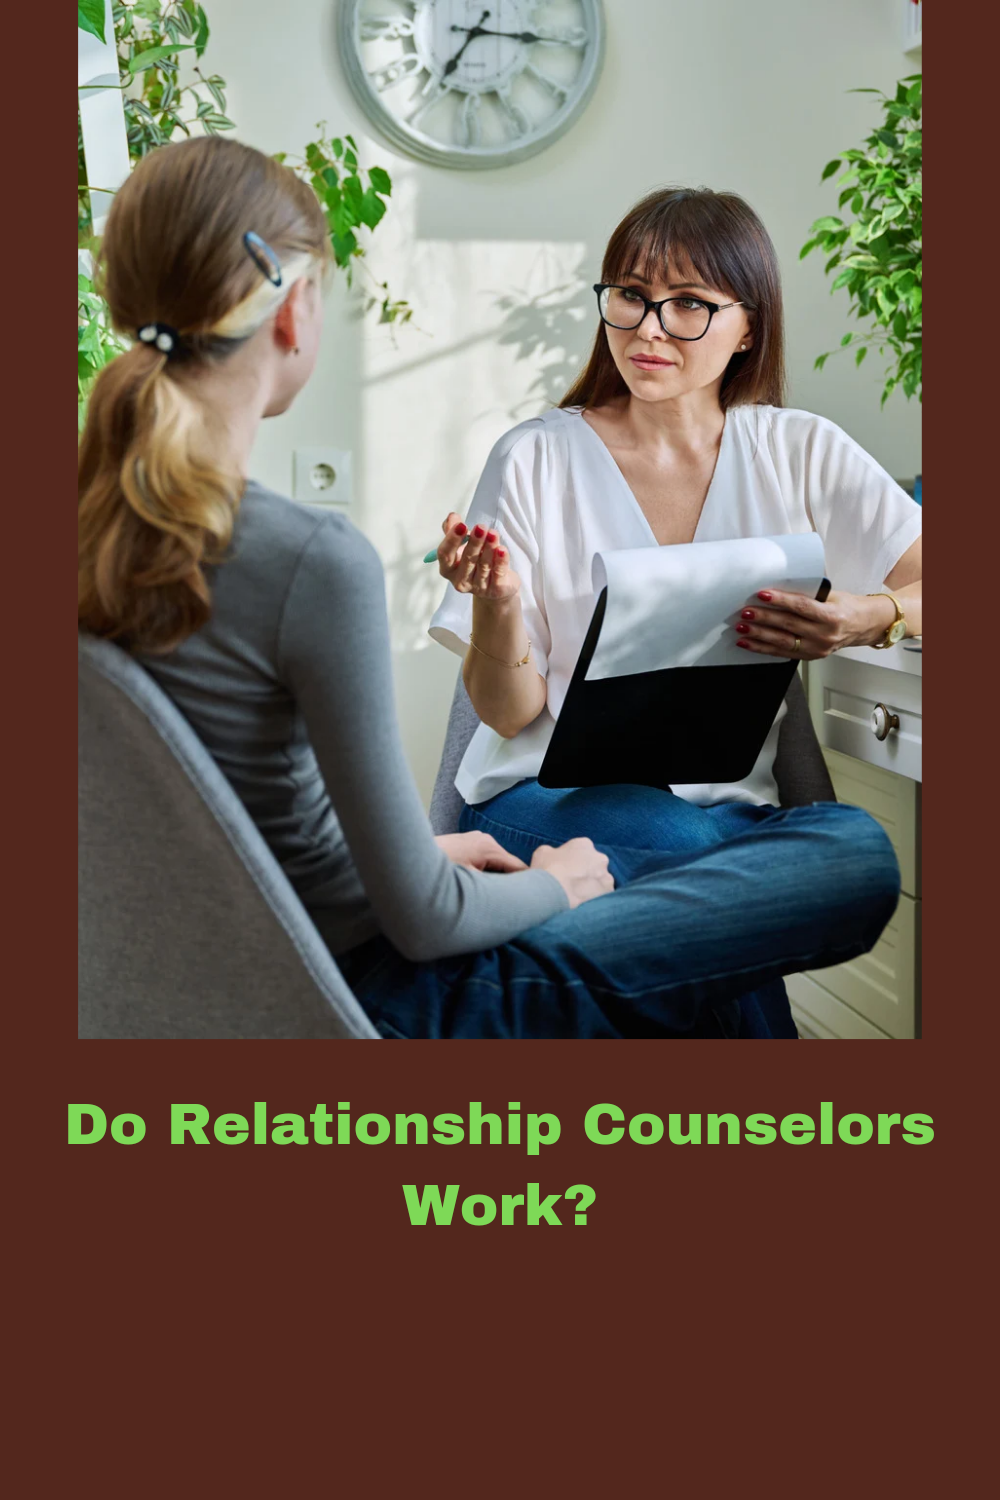 Do Relationship Counselors Work?